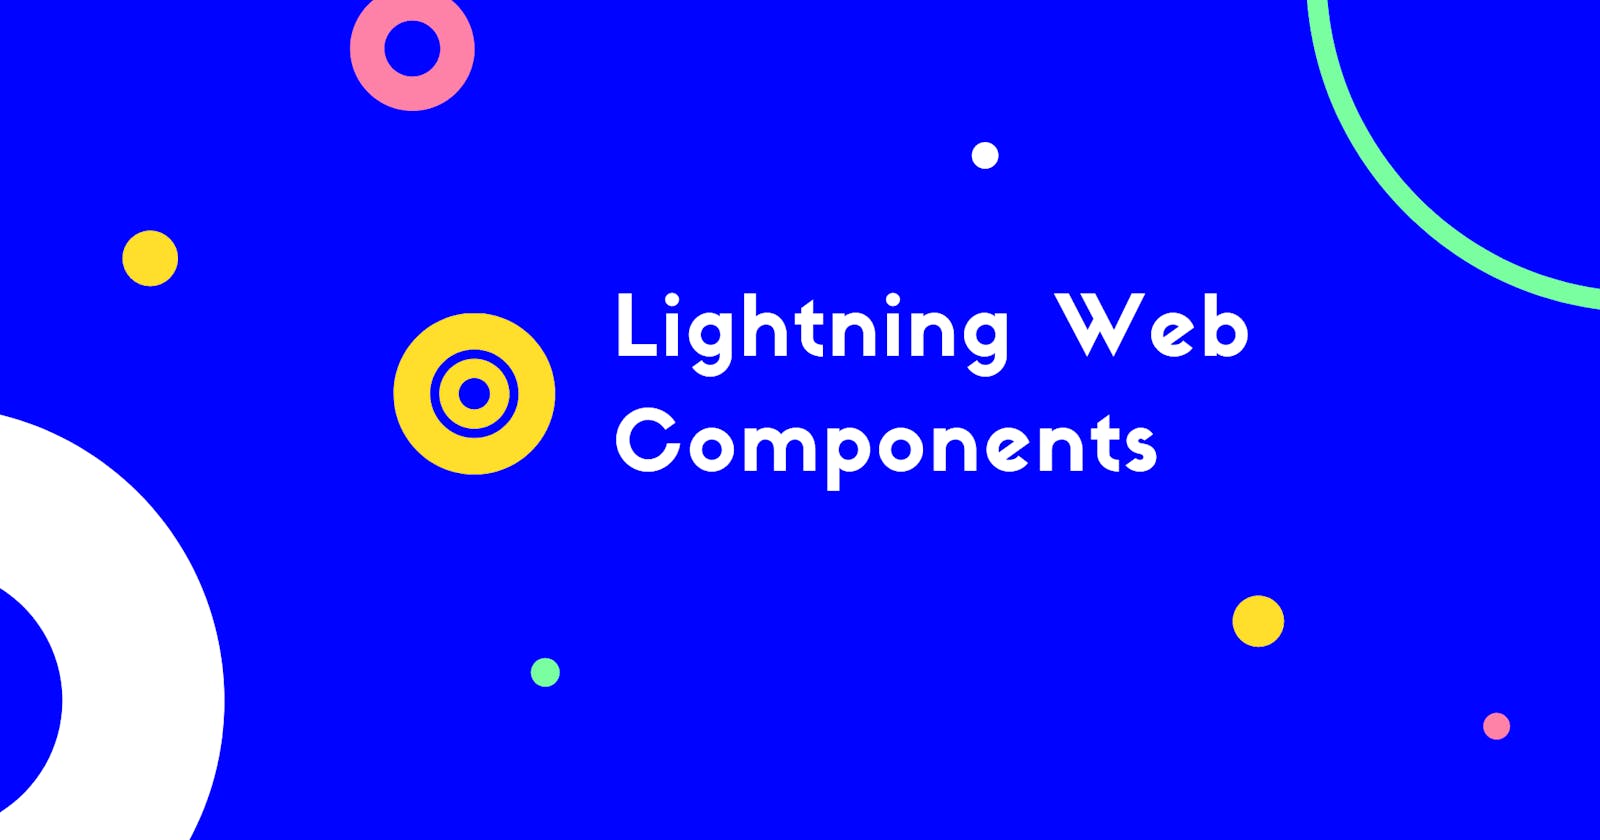 Lightning web components - Conditional Rendering